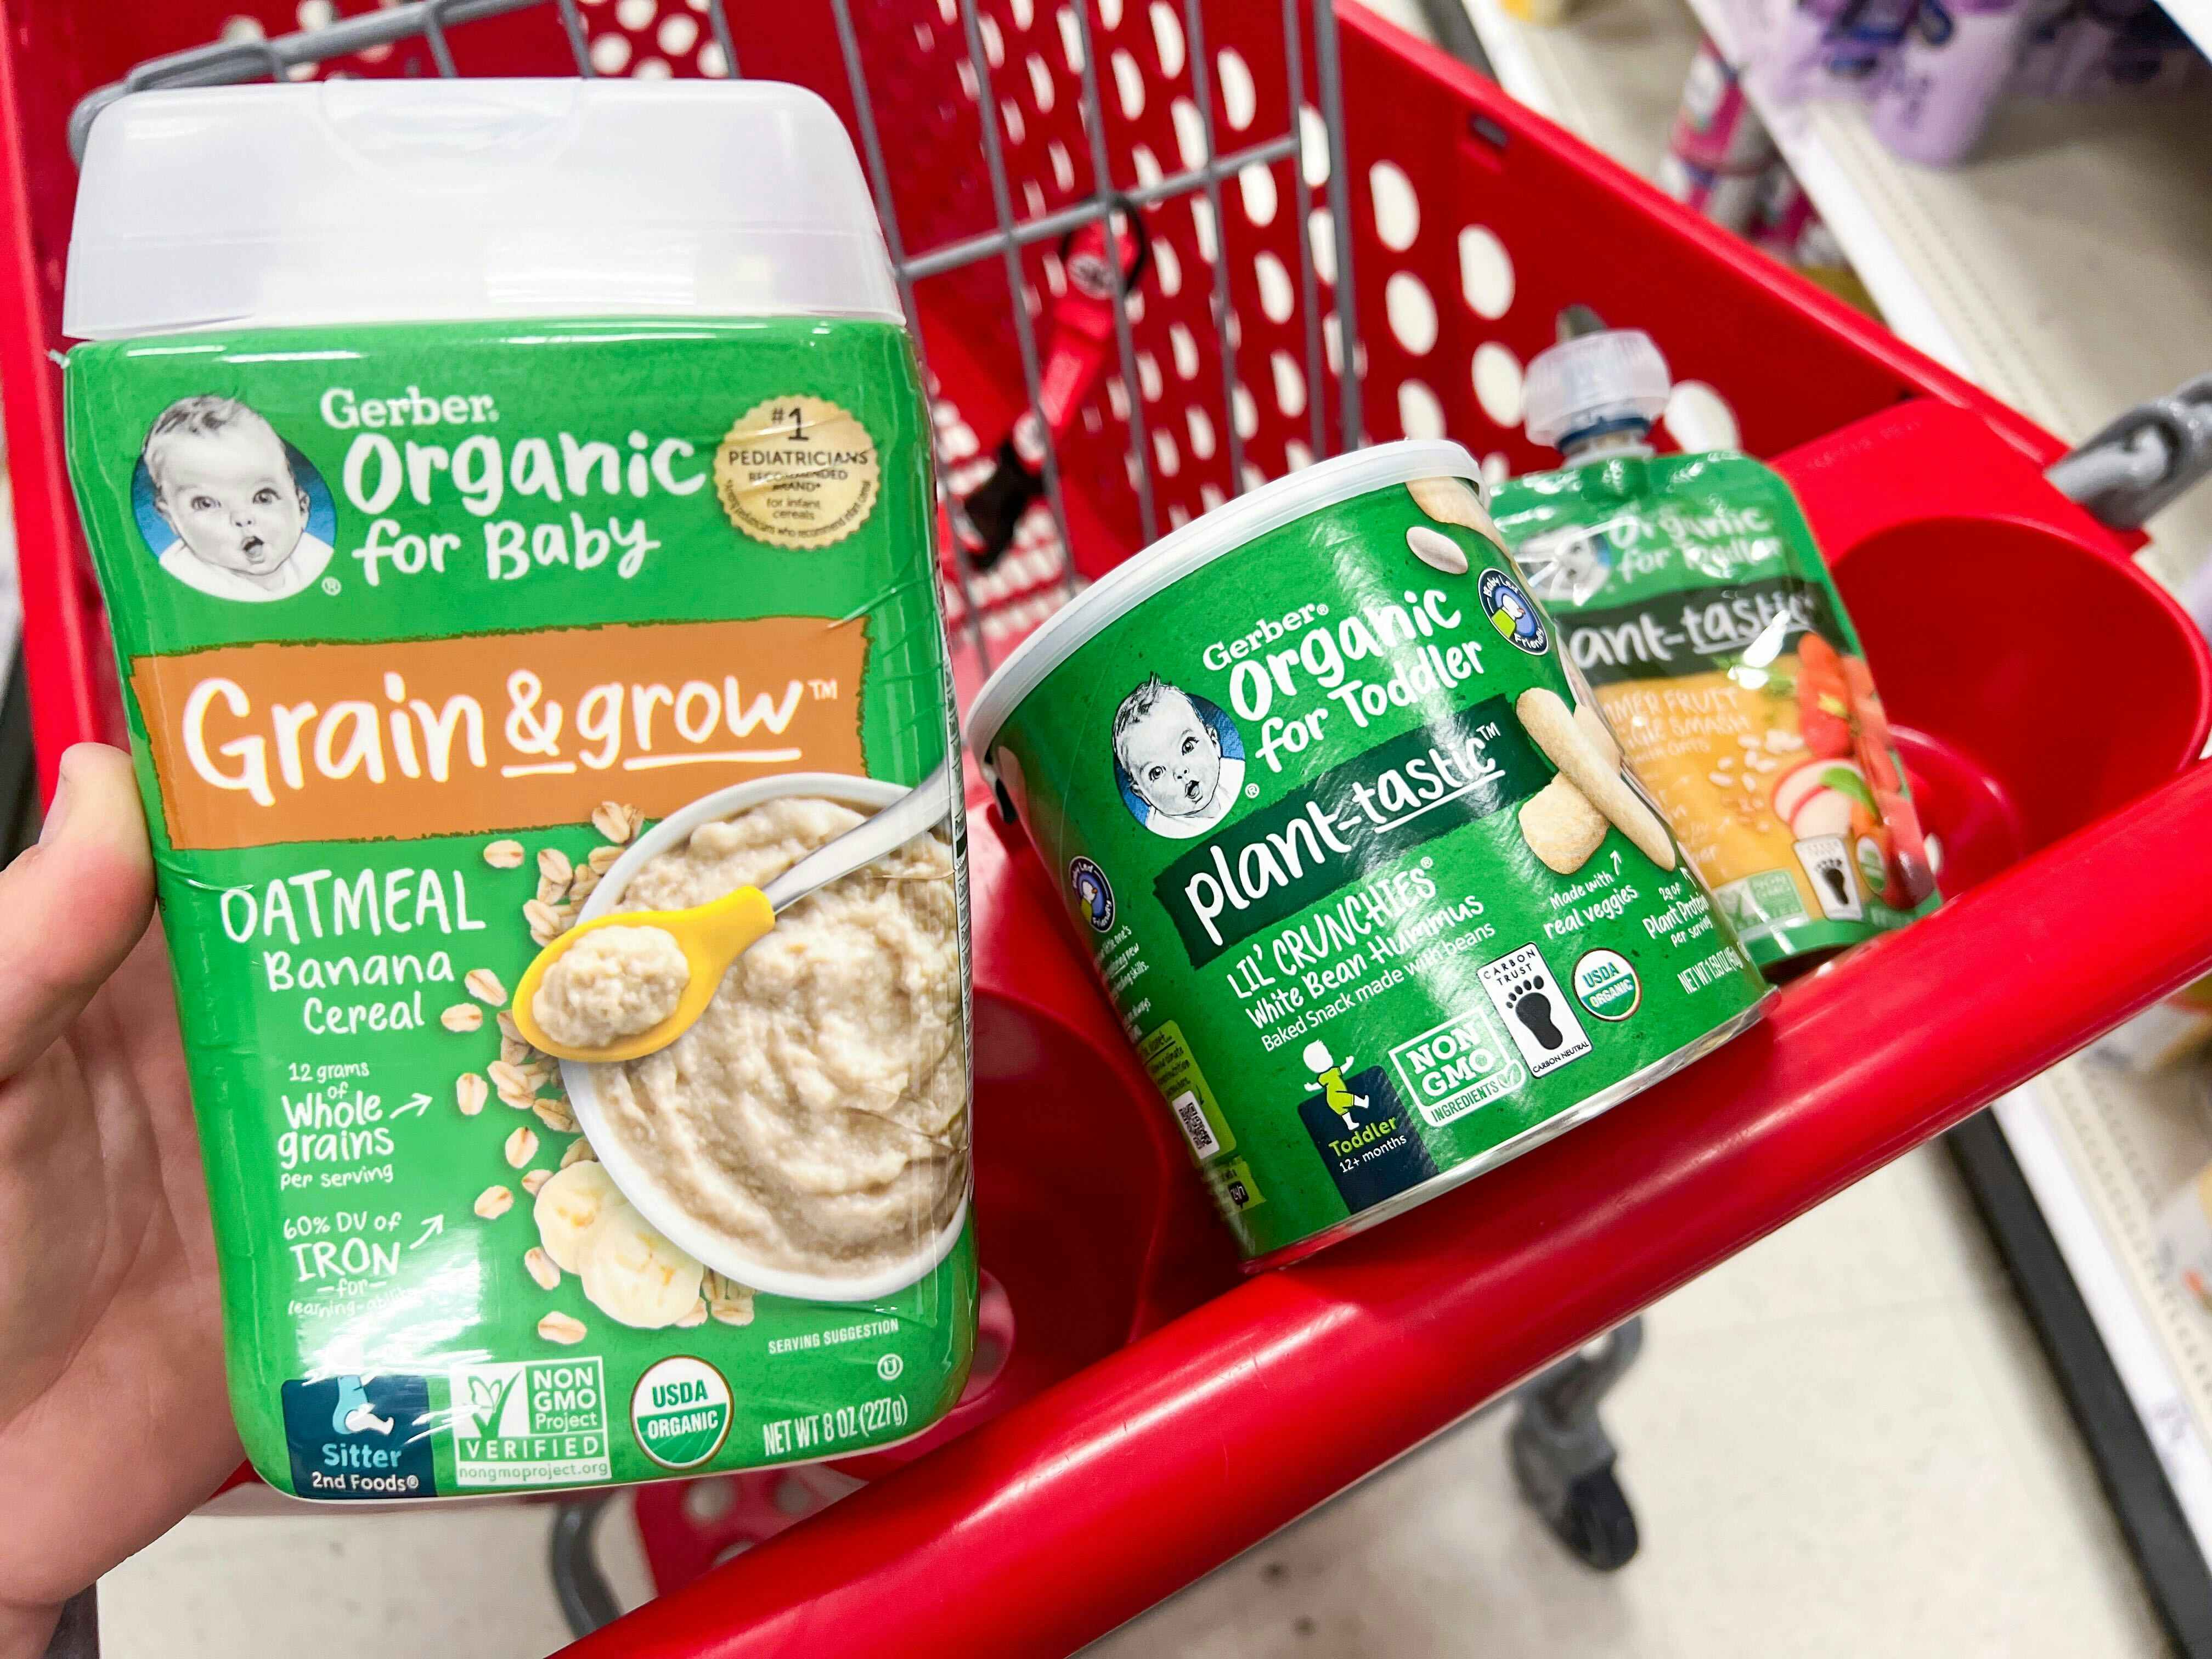 Three gerber organic baby products in the top section of a target shopping cart